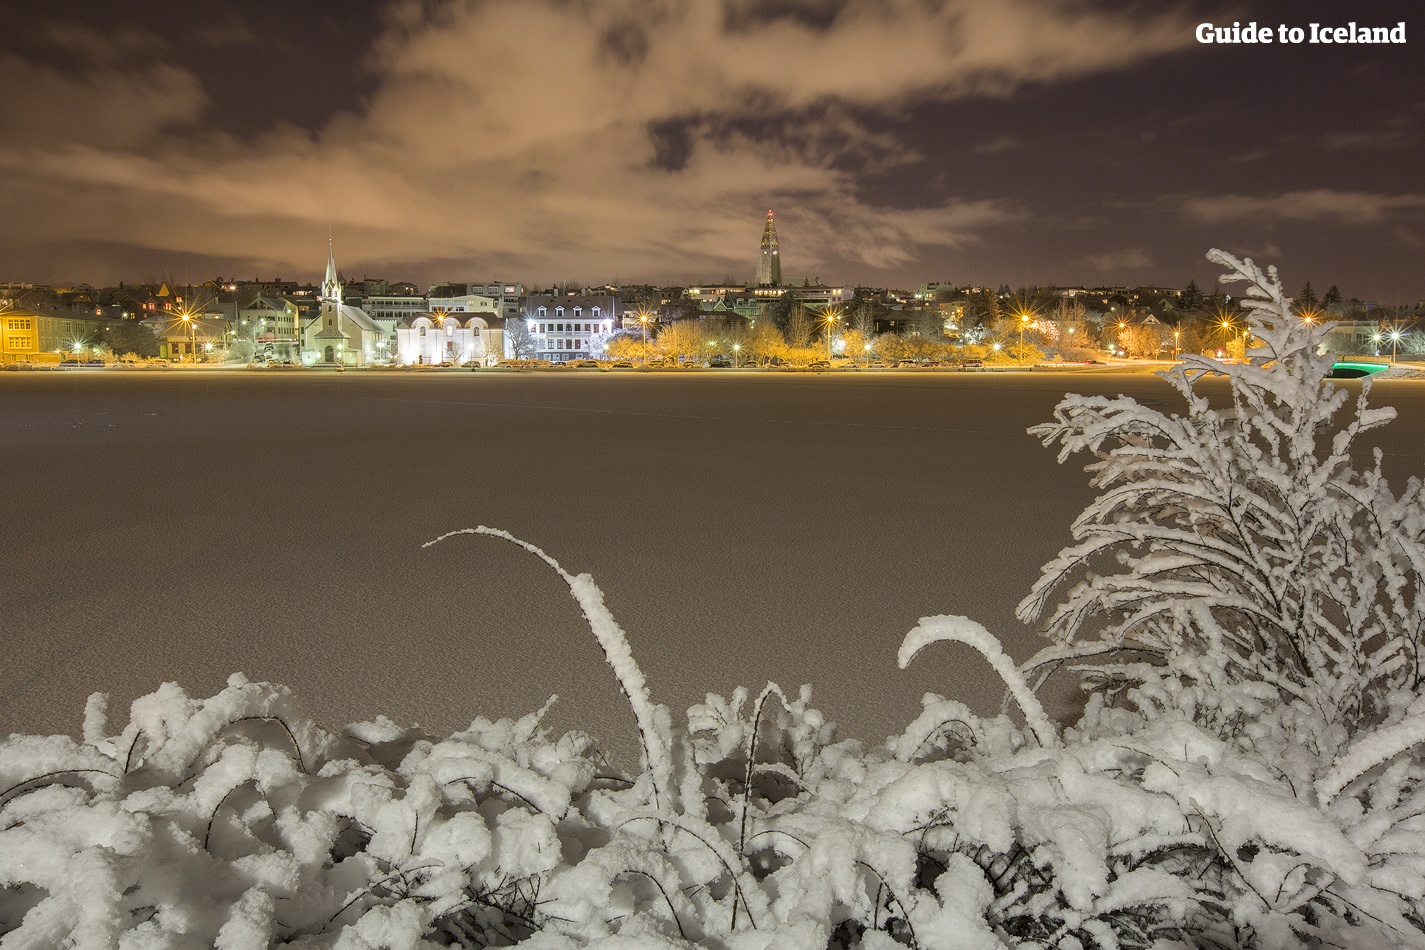 Reykjavík truly becomes a wonderland of snow and ice during winter.